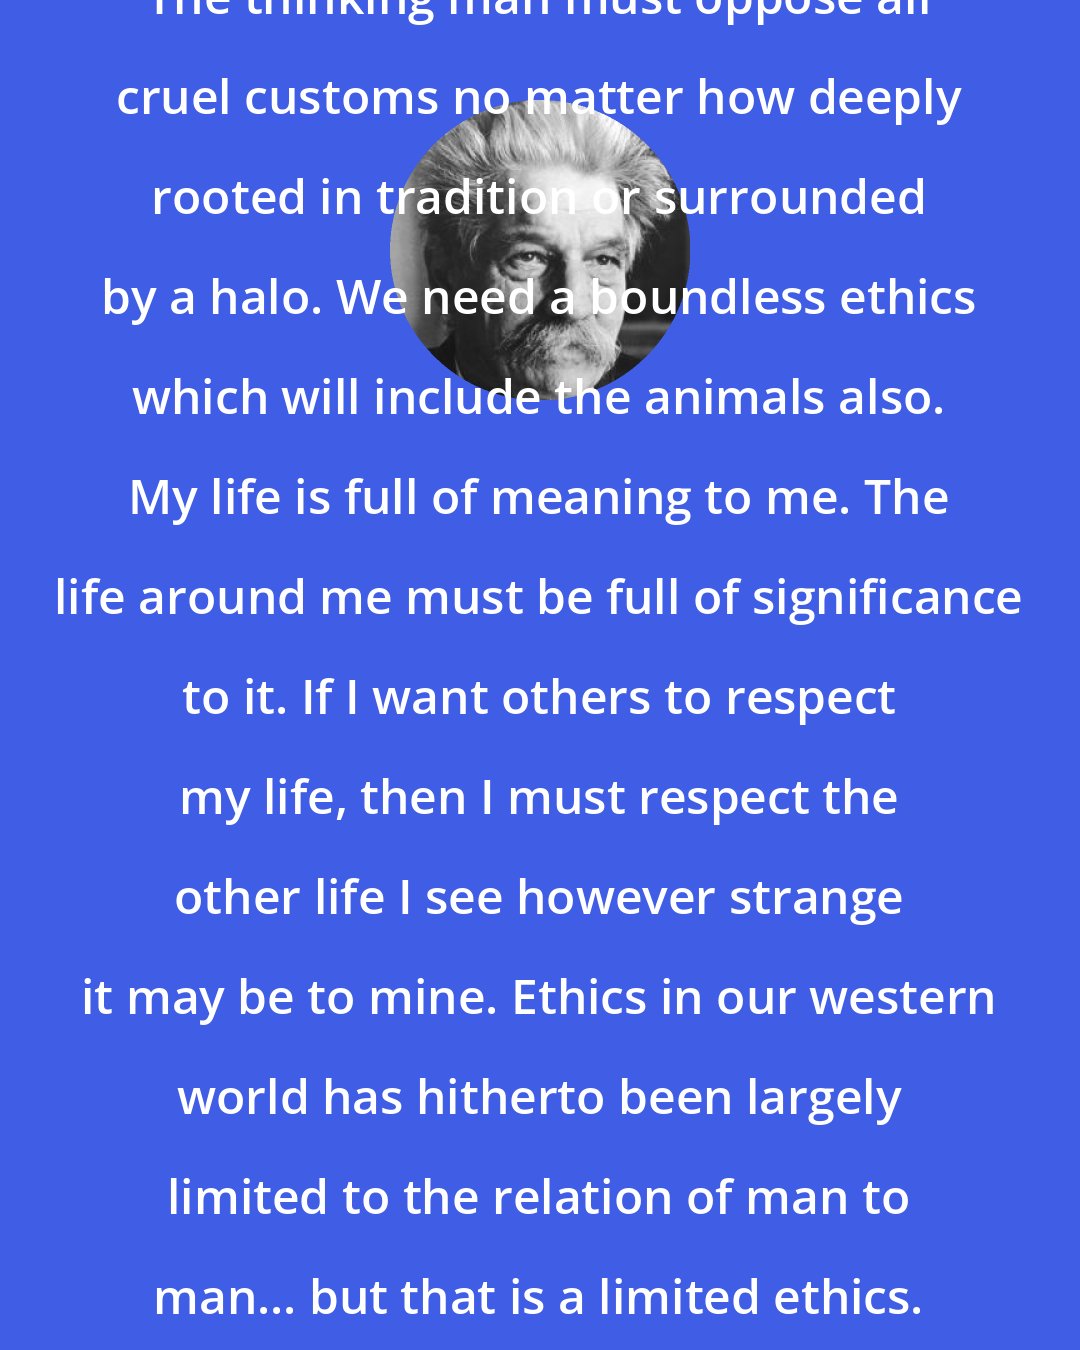 Albert Schweitzer: The thinking man must oppose all cruel customs no matter how deeply rooted in tradition or surrounded by a halo. We need a boundless ethics which will include the animals also. My life is full of meaning to me. The life around me must be full of significance to it. If I want others to respect my life, then I must respect the other life I see however strange it may be to mine. Ethics in our western world has hitherto been largely limited to the relation of man to man... but that is a limited ethics.